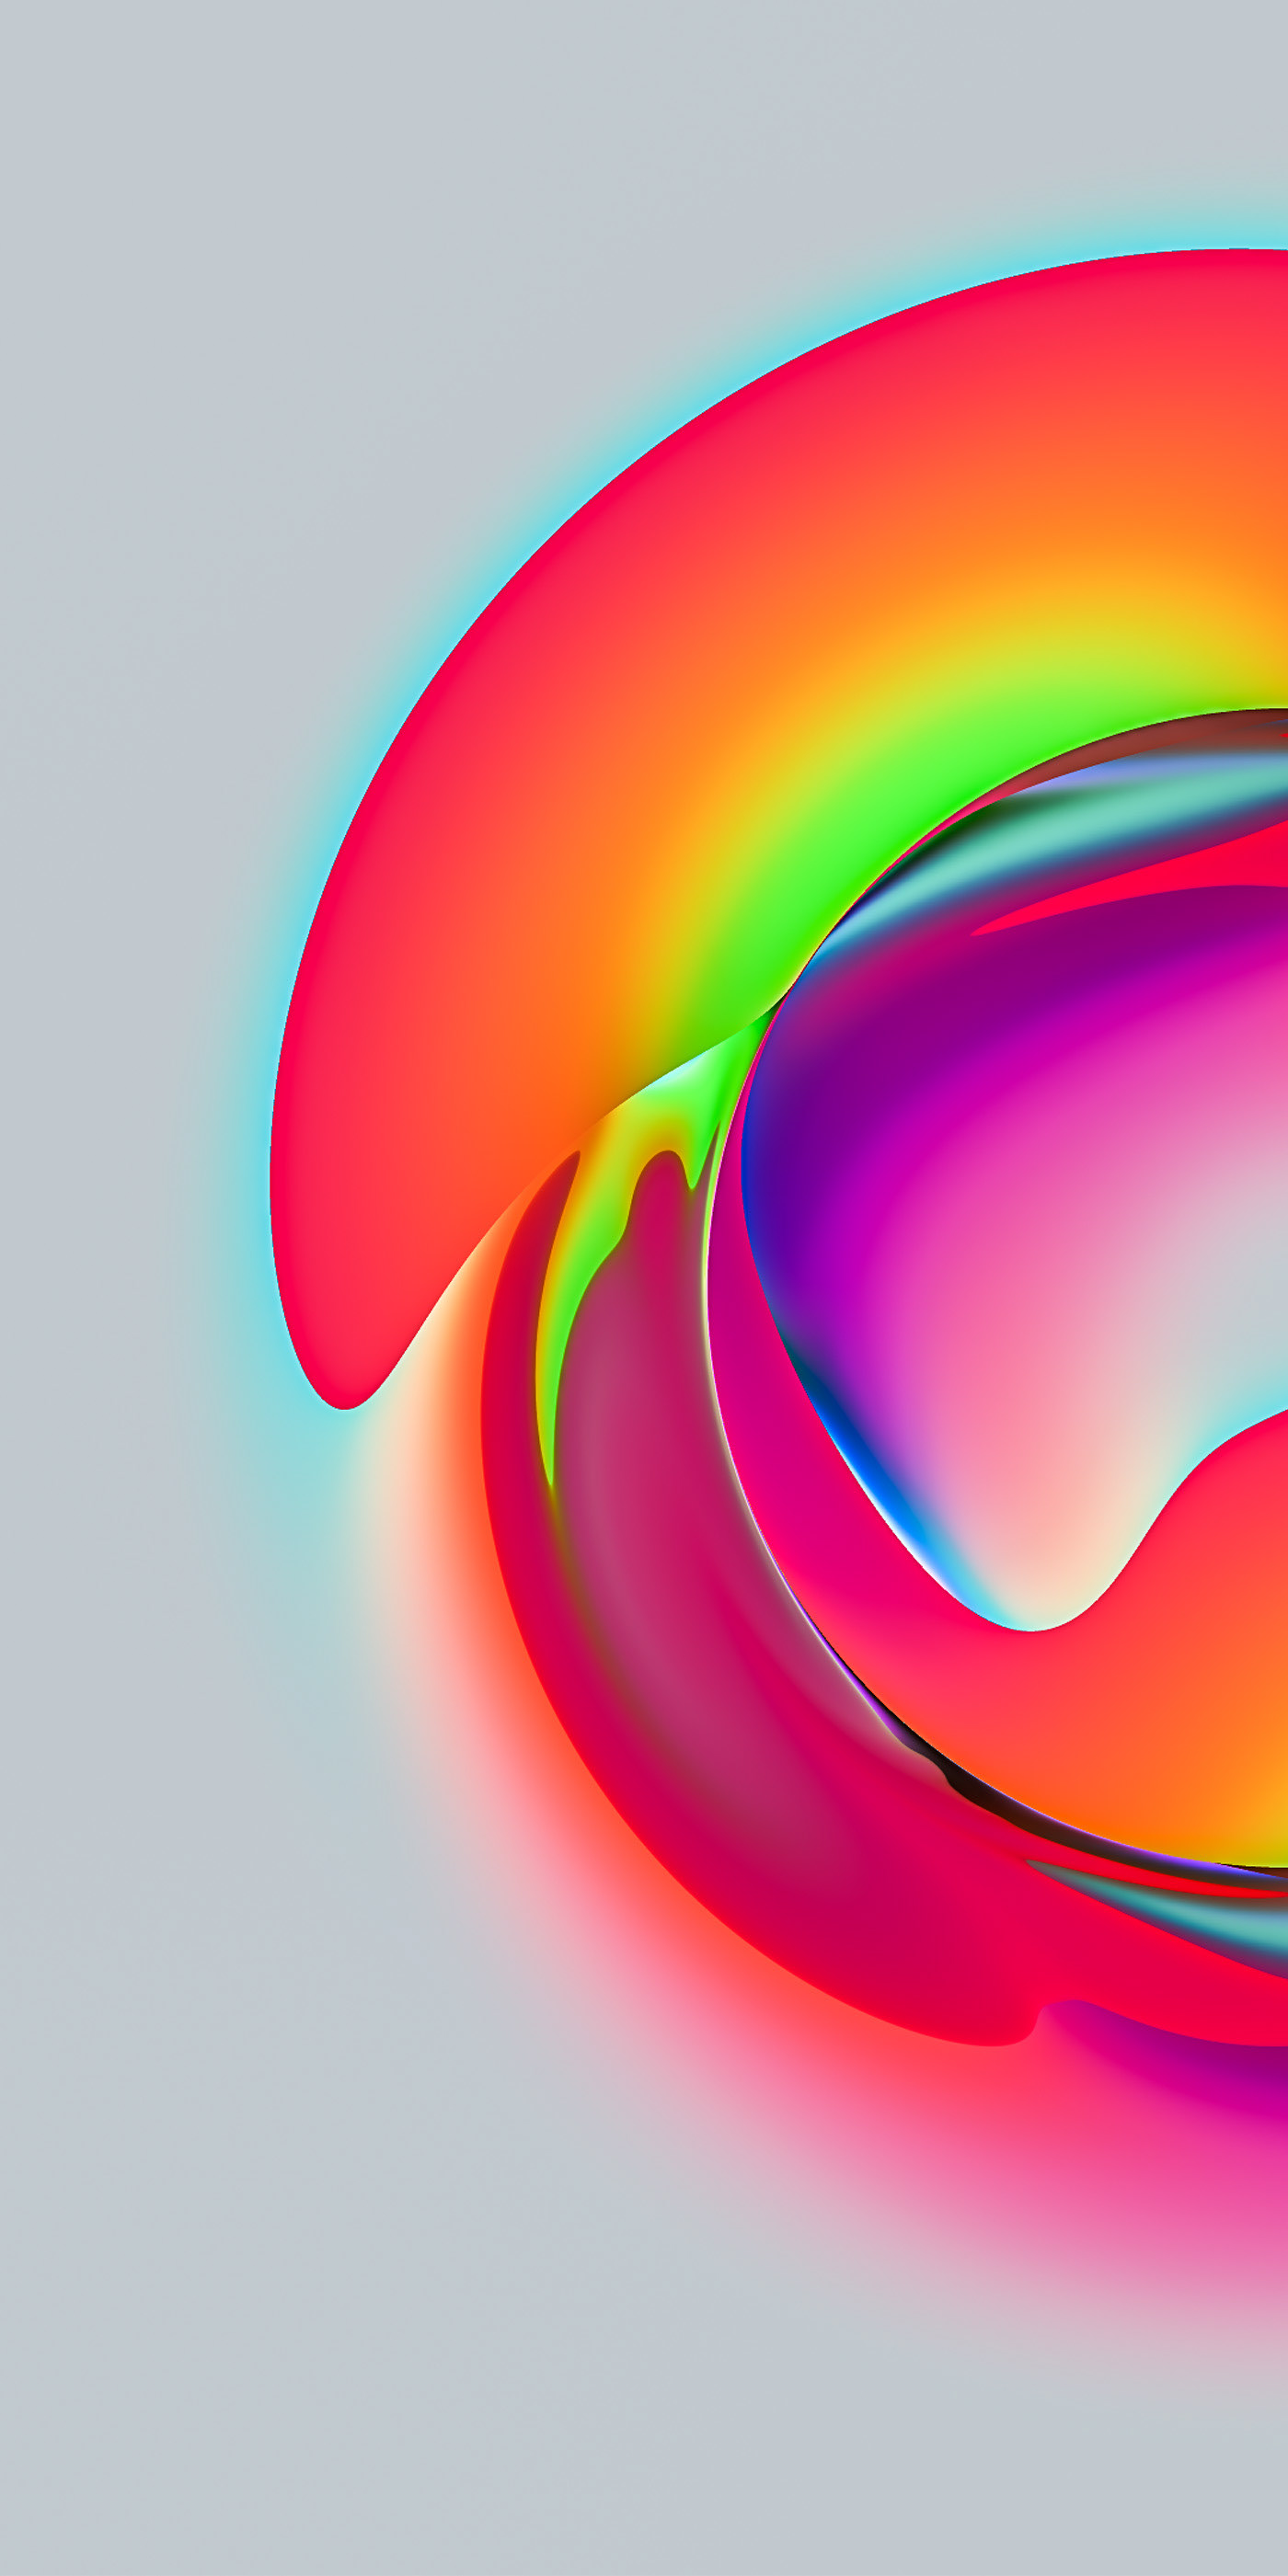 abstract art dispersion Filter Forge generative Procedural refraction circle sphere symmetry